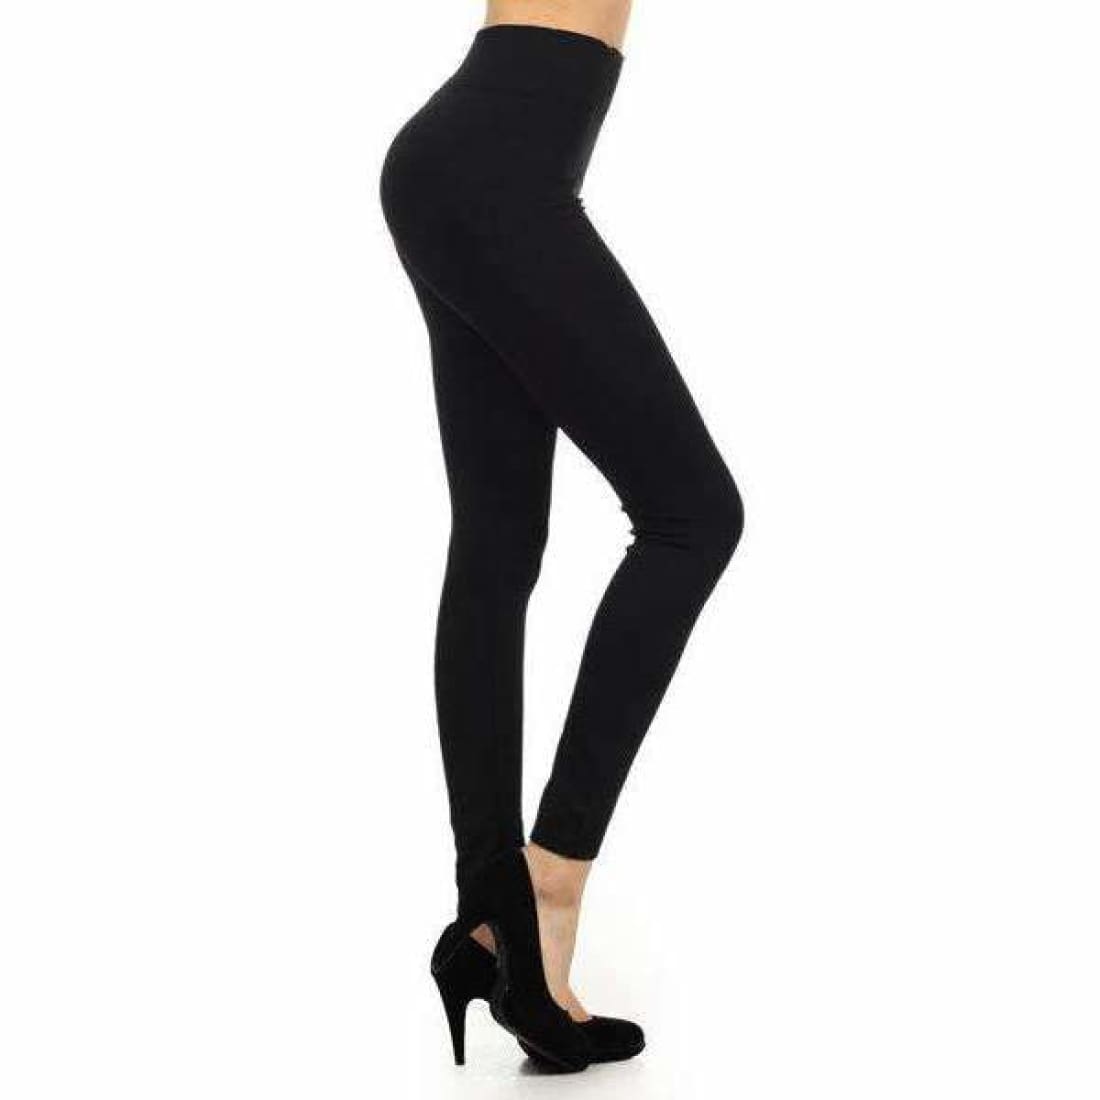 L and L Stuff - Yelete Ladies' Seamless Leggings (One Size)